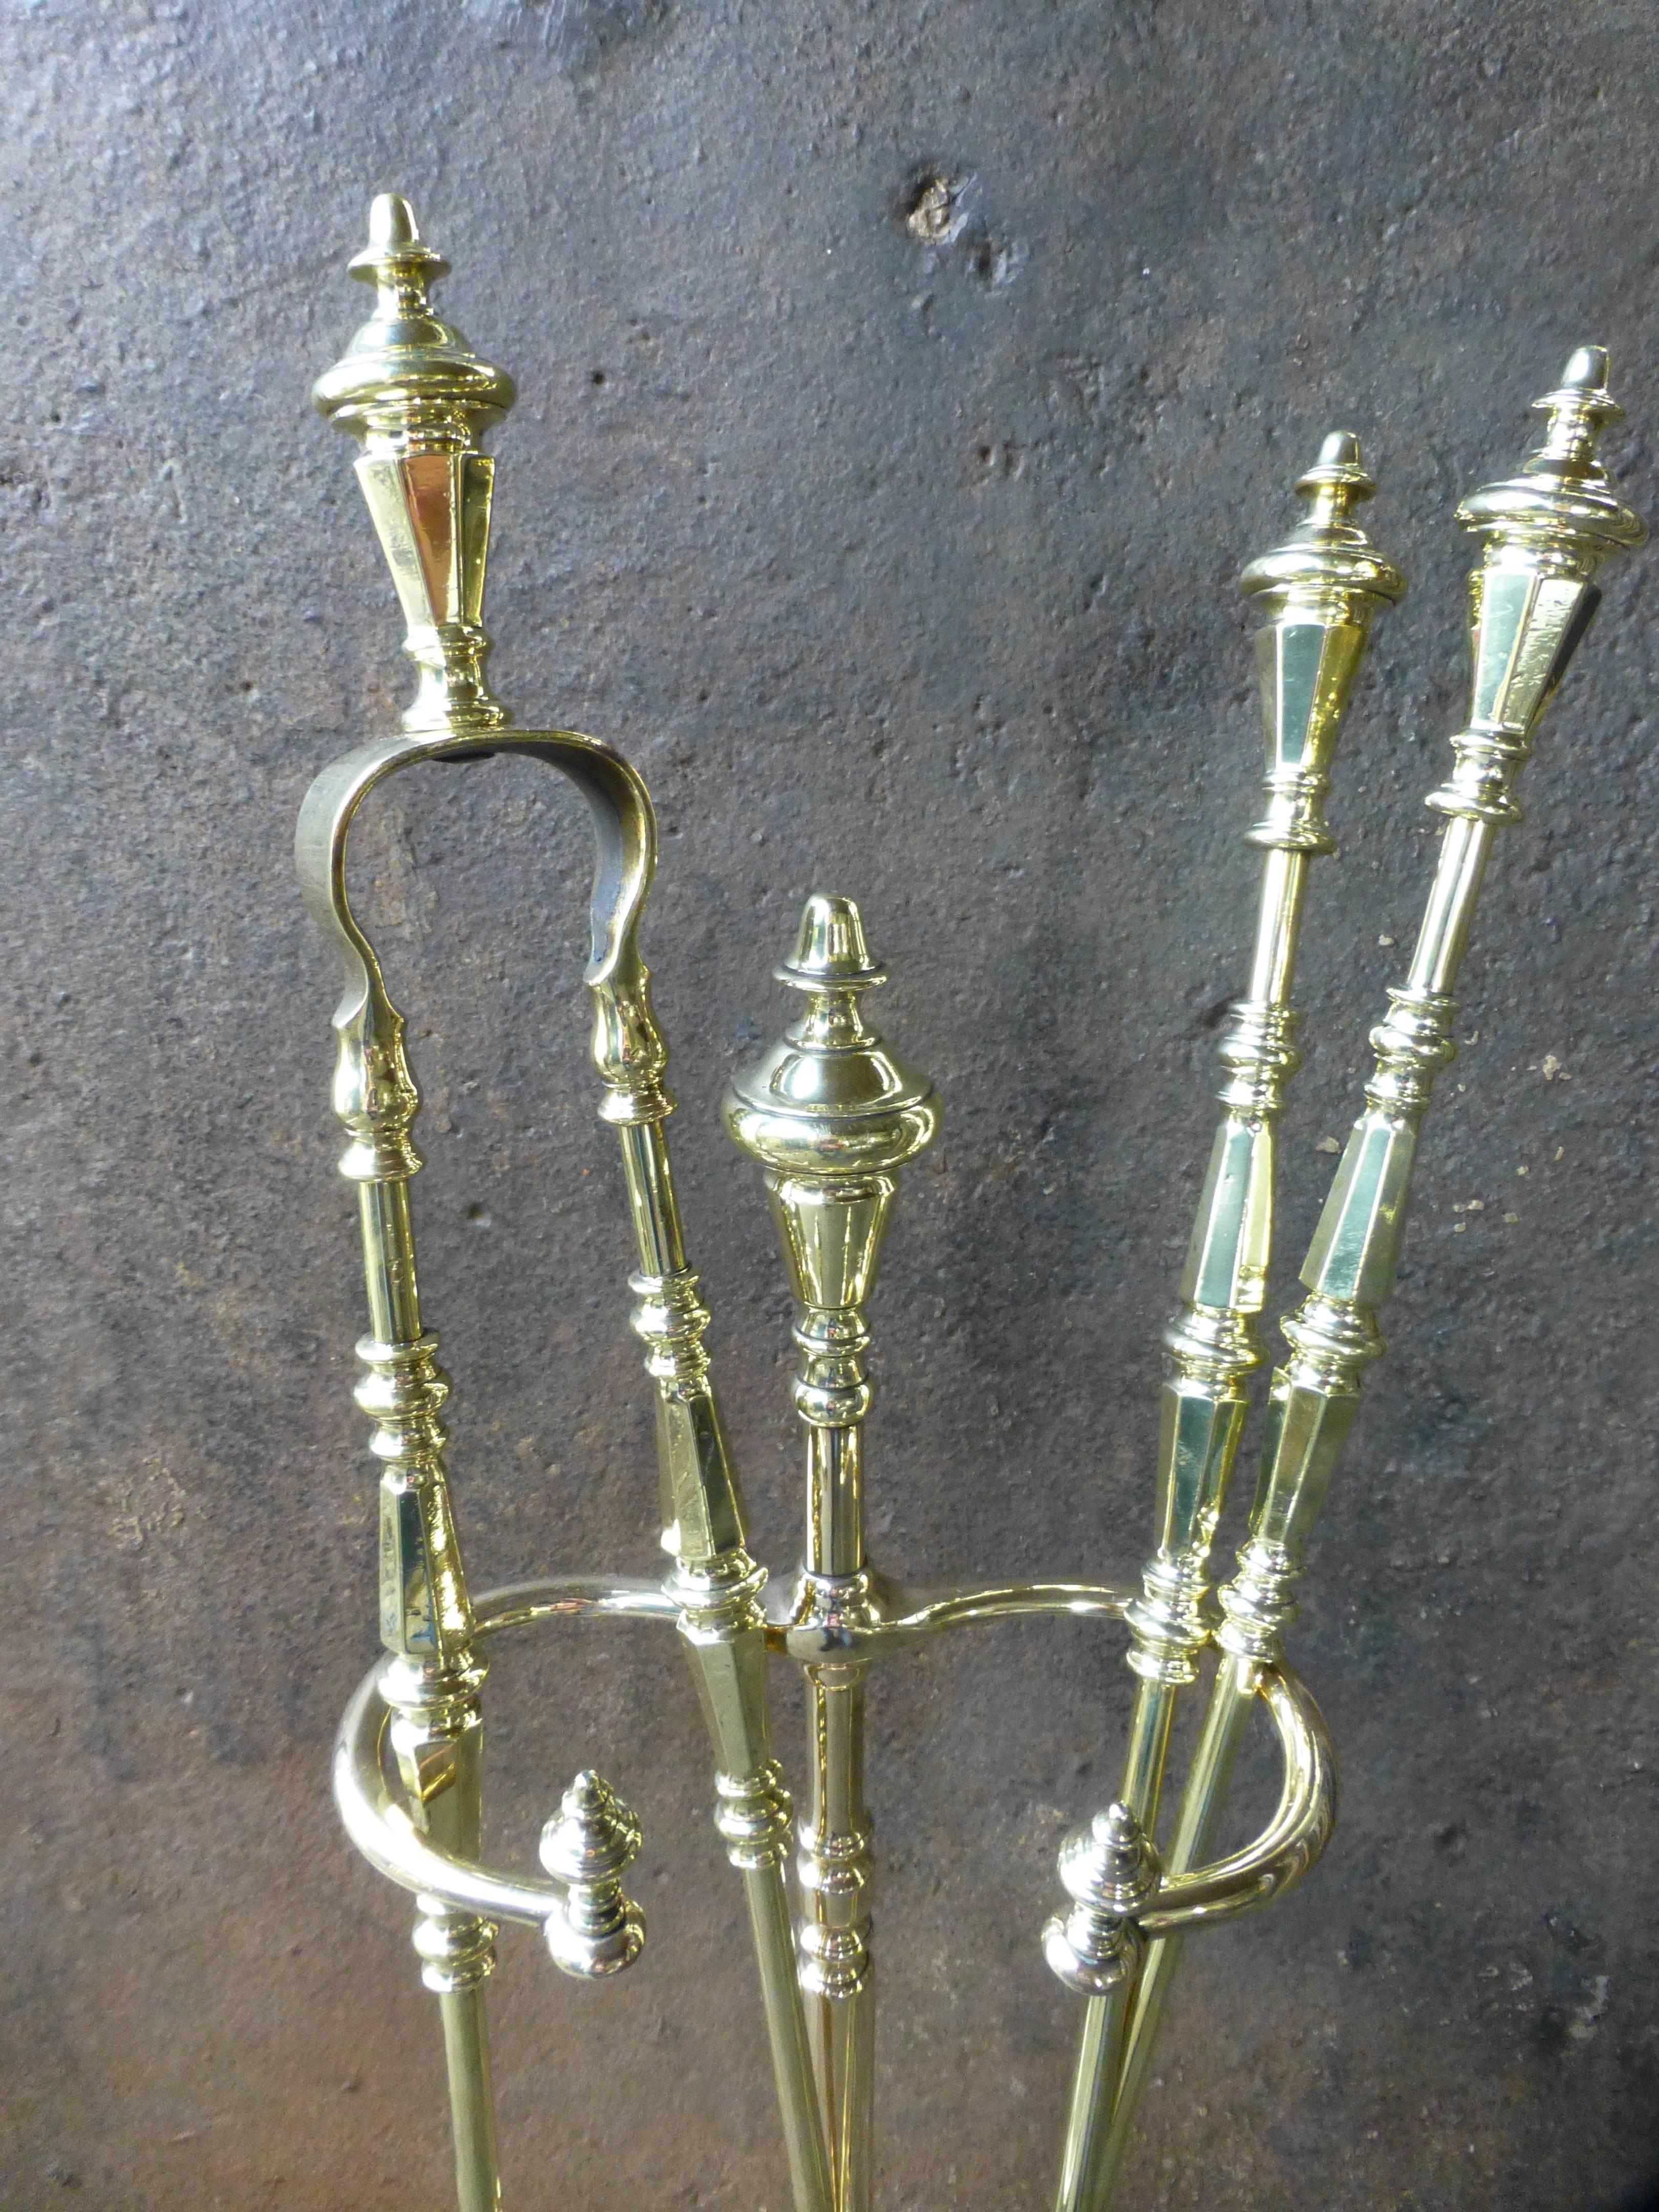 Polished 19th Century French Fireplace Tools, Fireside Companion Set